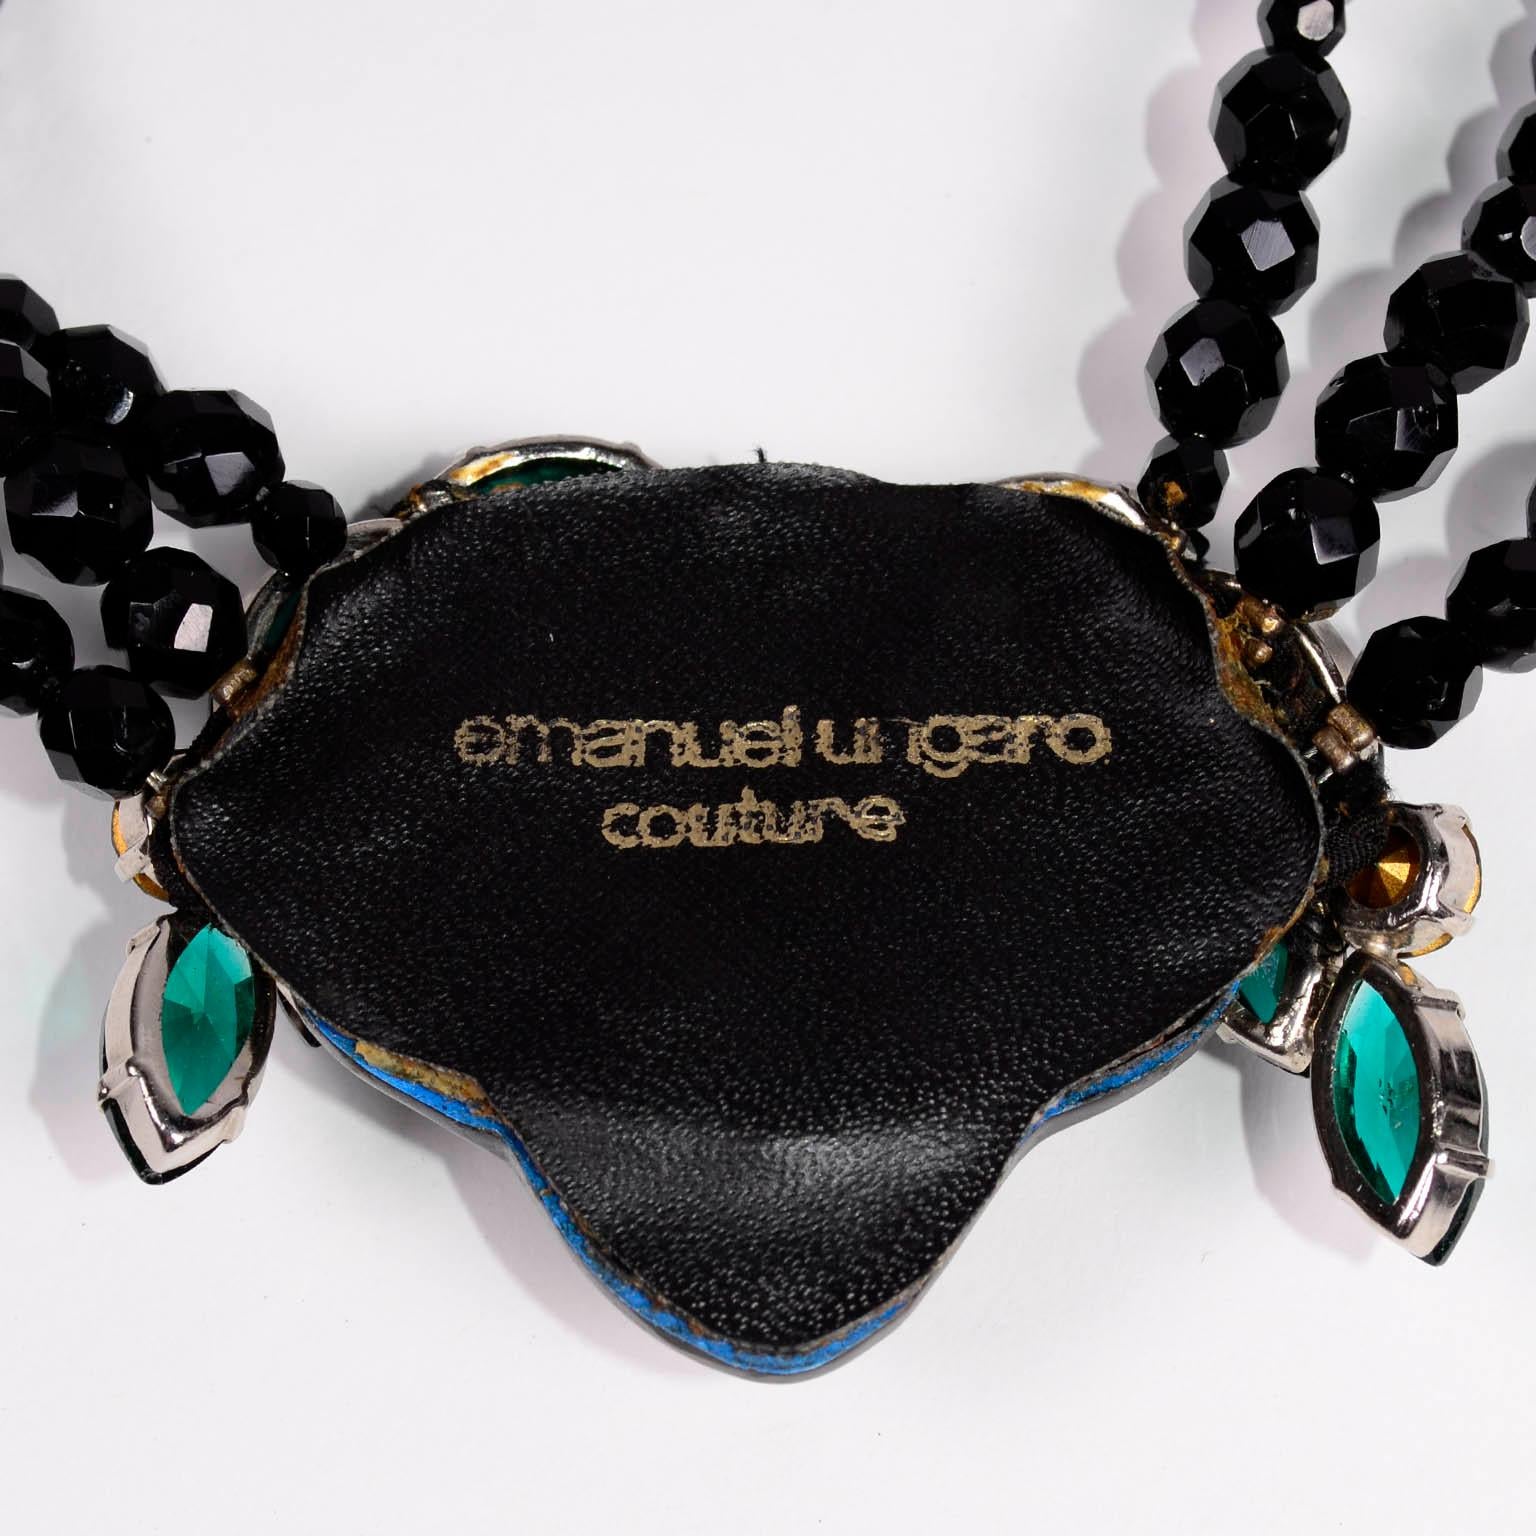 Erare 1980s Emanuel Ungaro Couture Black & Green Choker Mughal Inspired Necklace 1